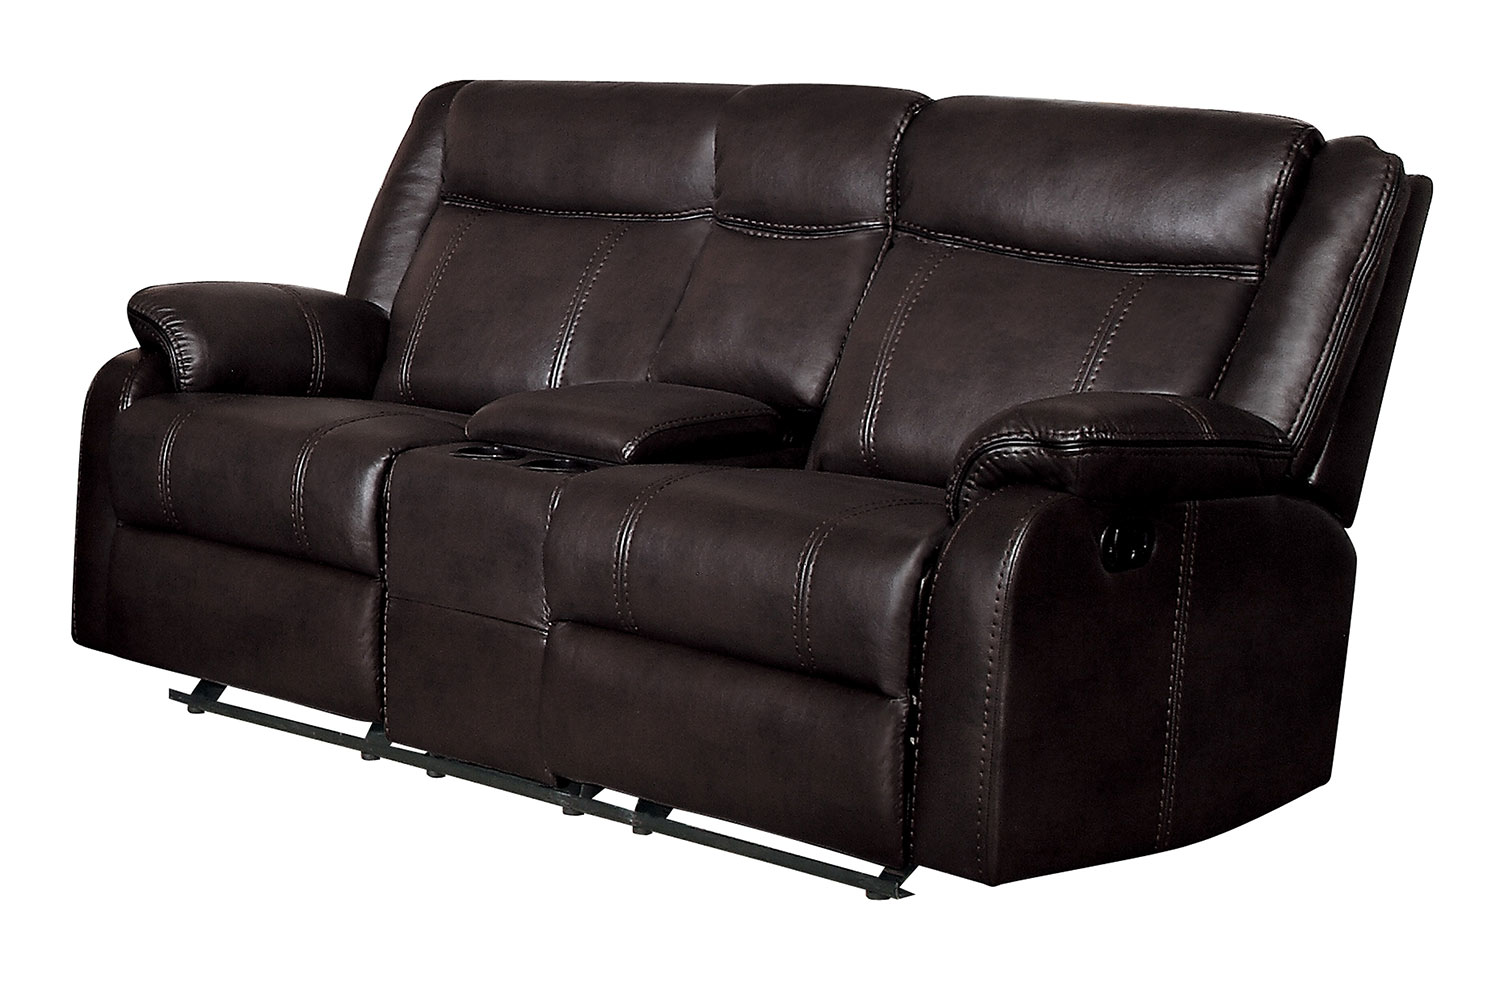 Homelegance Jude Double Glider Reclining Love Seat with Console - Dark Brown Leather Gel Match